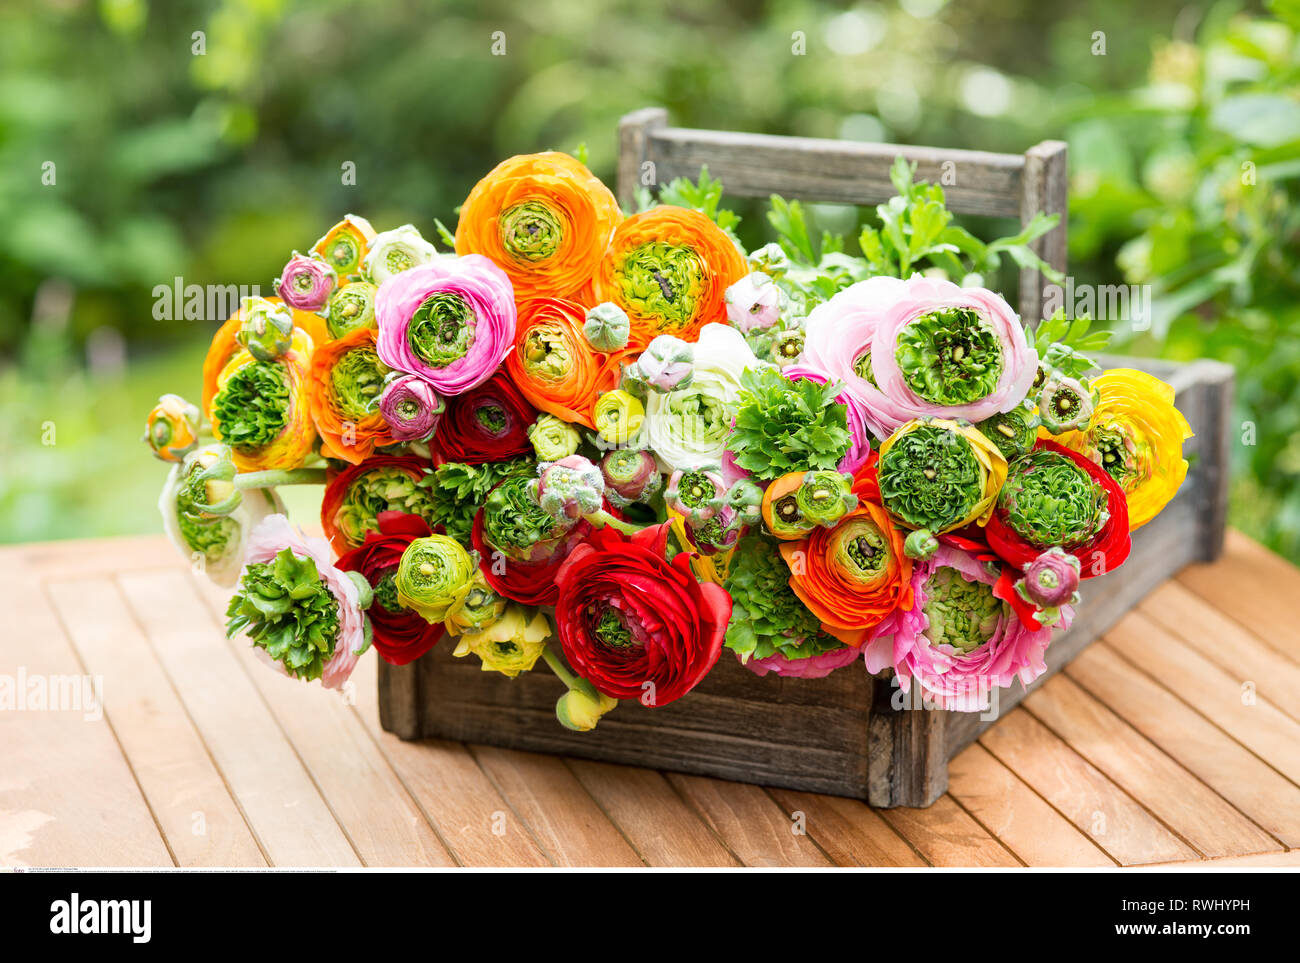 botany, multi-coloured ranunculus in harvest, Caution! For Greetingcard-Use / Postcard-Use In German Speaking Countries Certain Restrictions May Apply Stock Photo